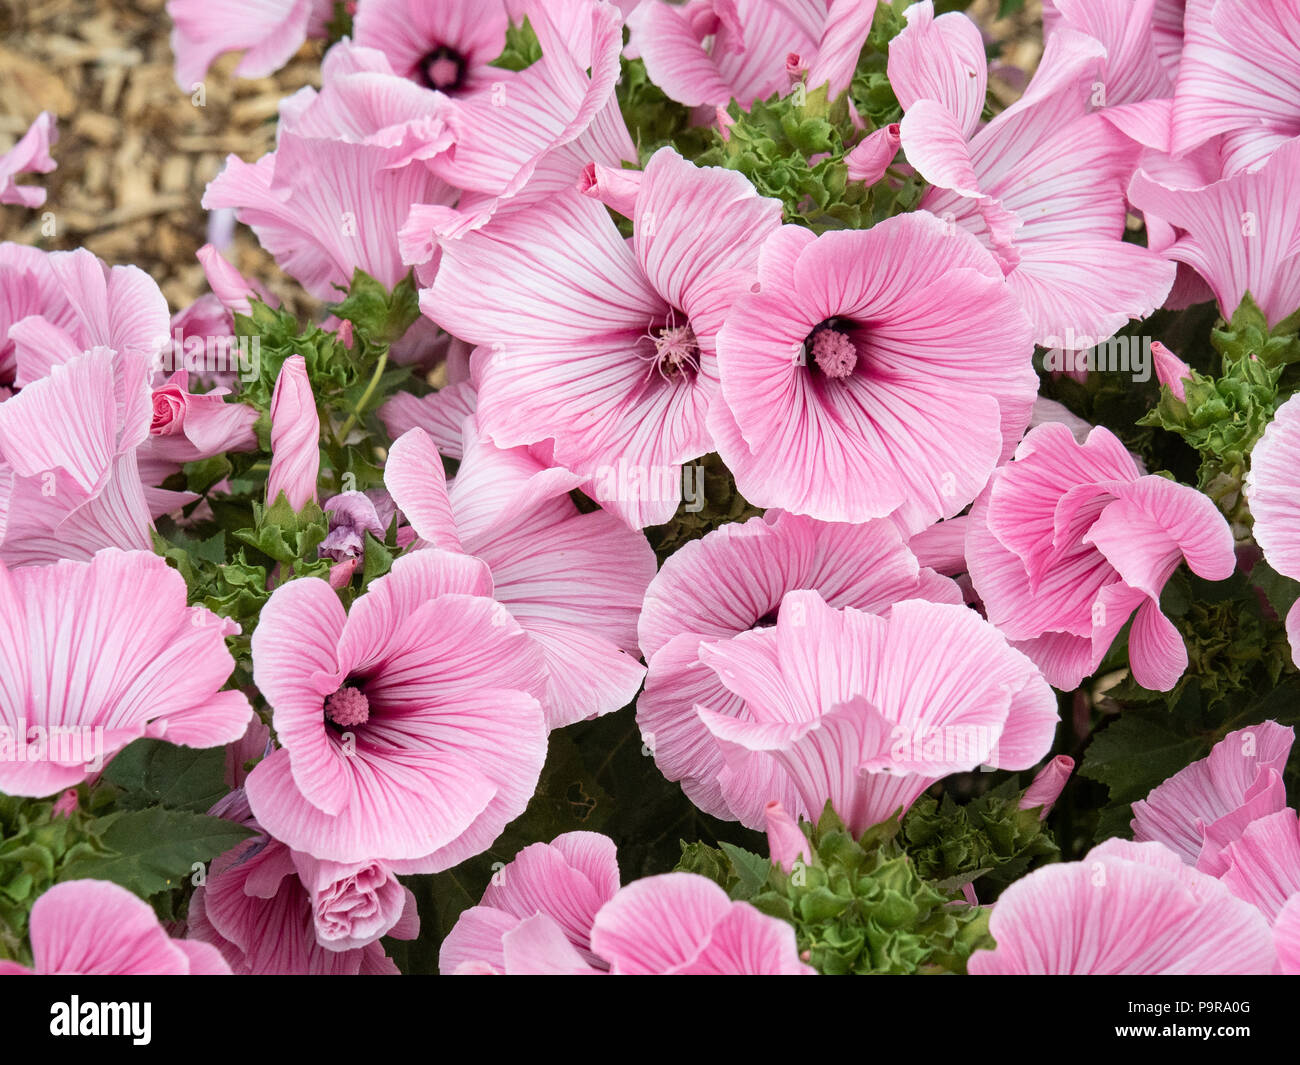 A group of the large pink flowers of Lavatera Silver Cup Stock Photo